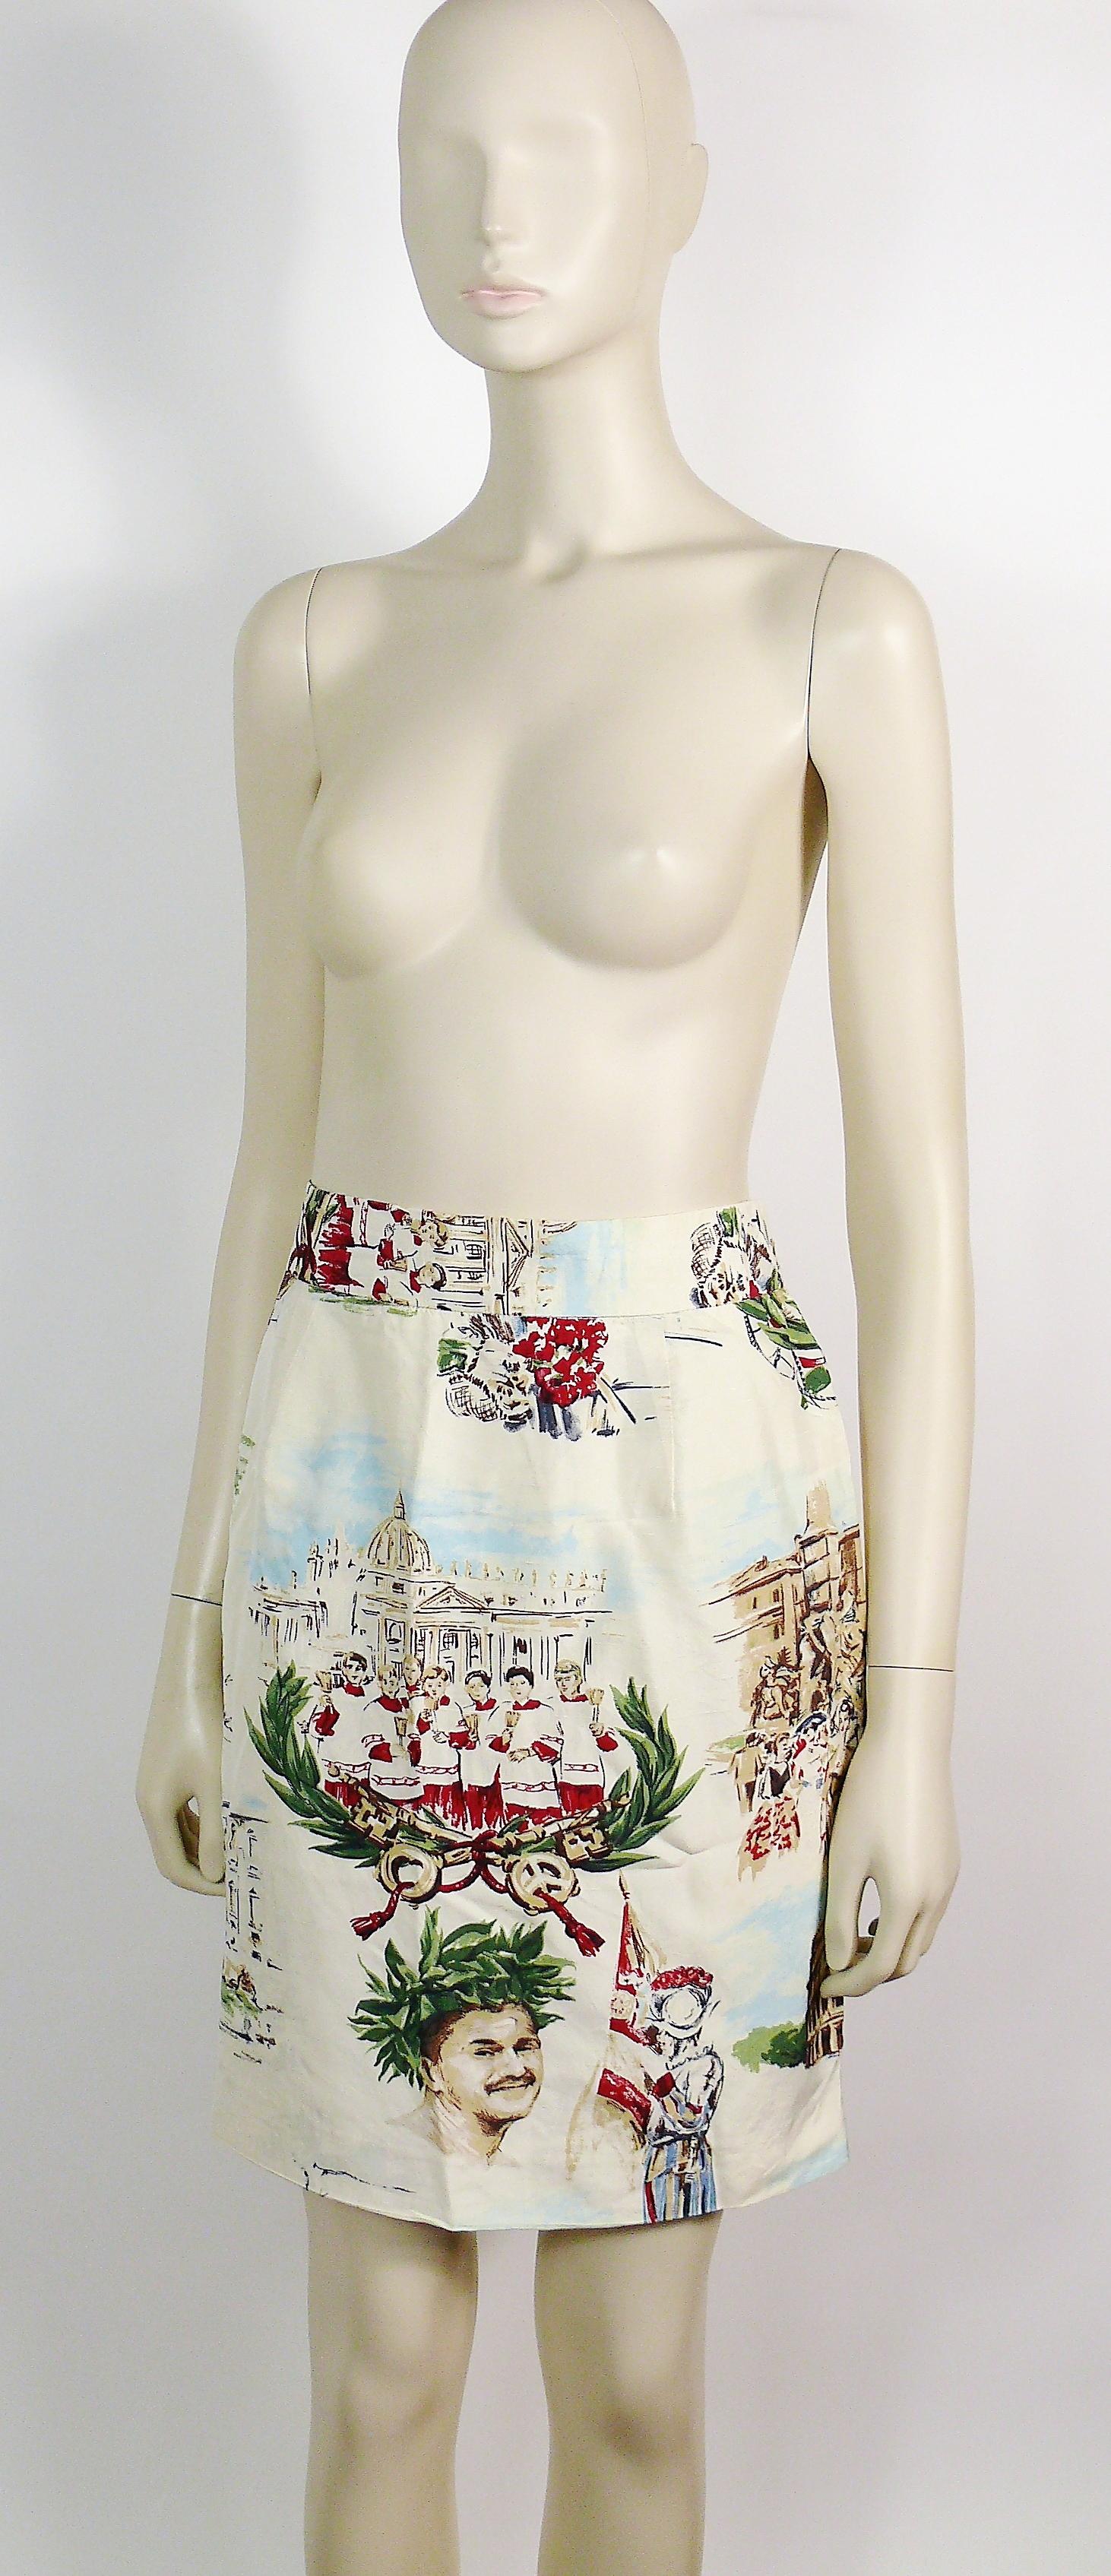 Women's Moschino Couture Rome Scenes and Franco Moschino Emperor Print Skirt US Size 12